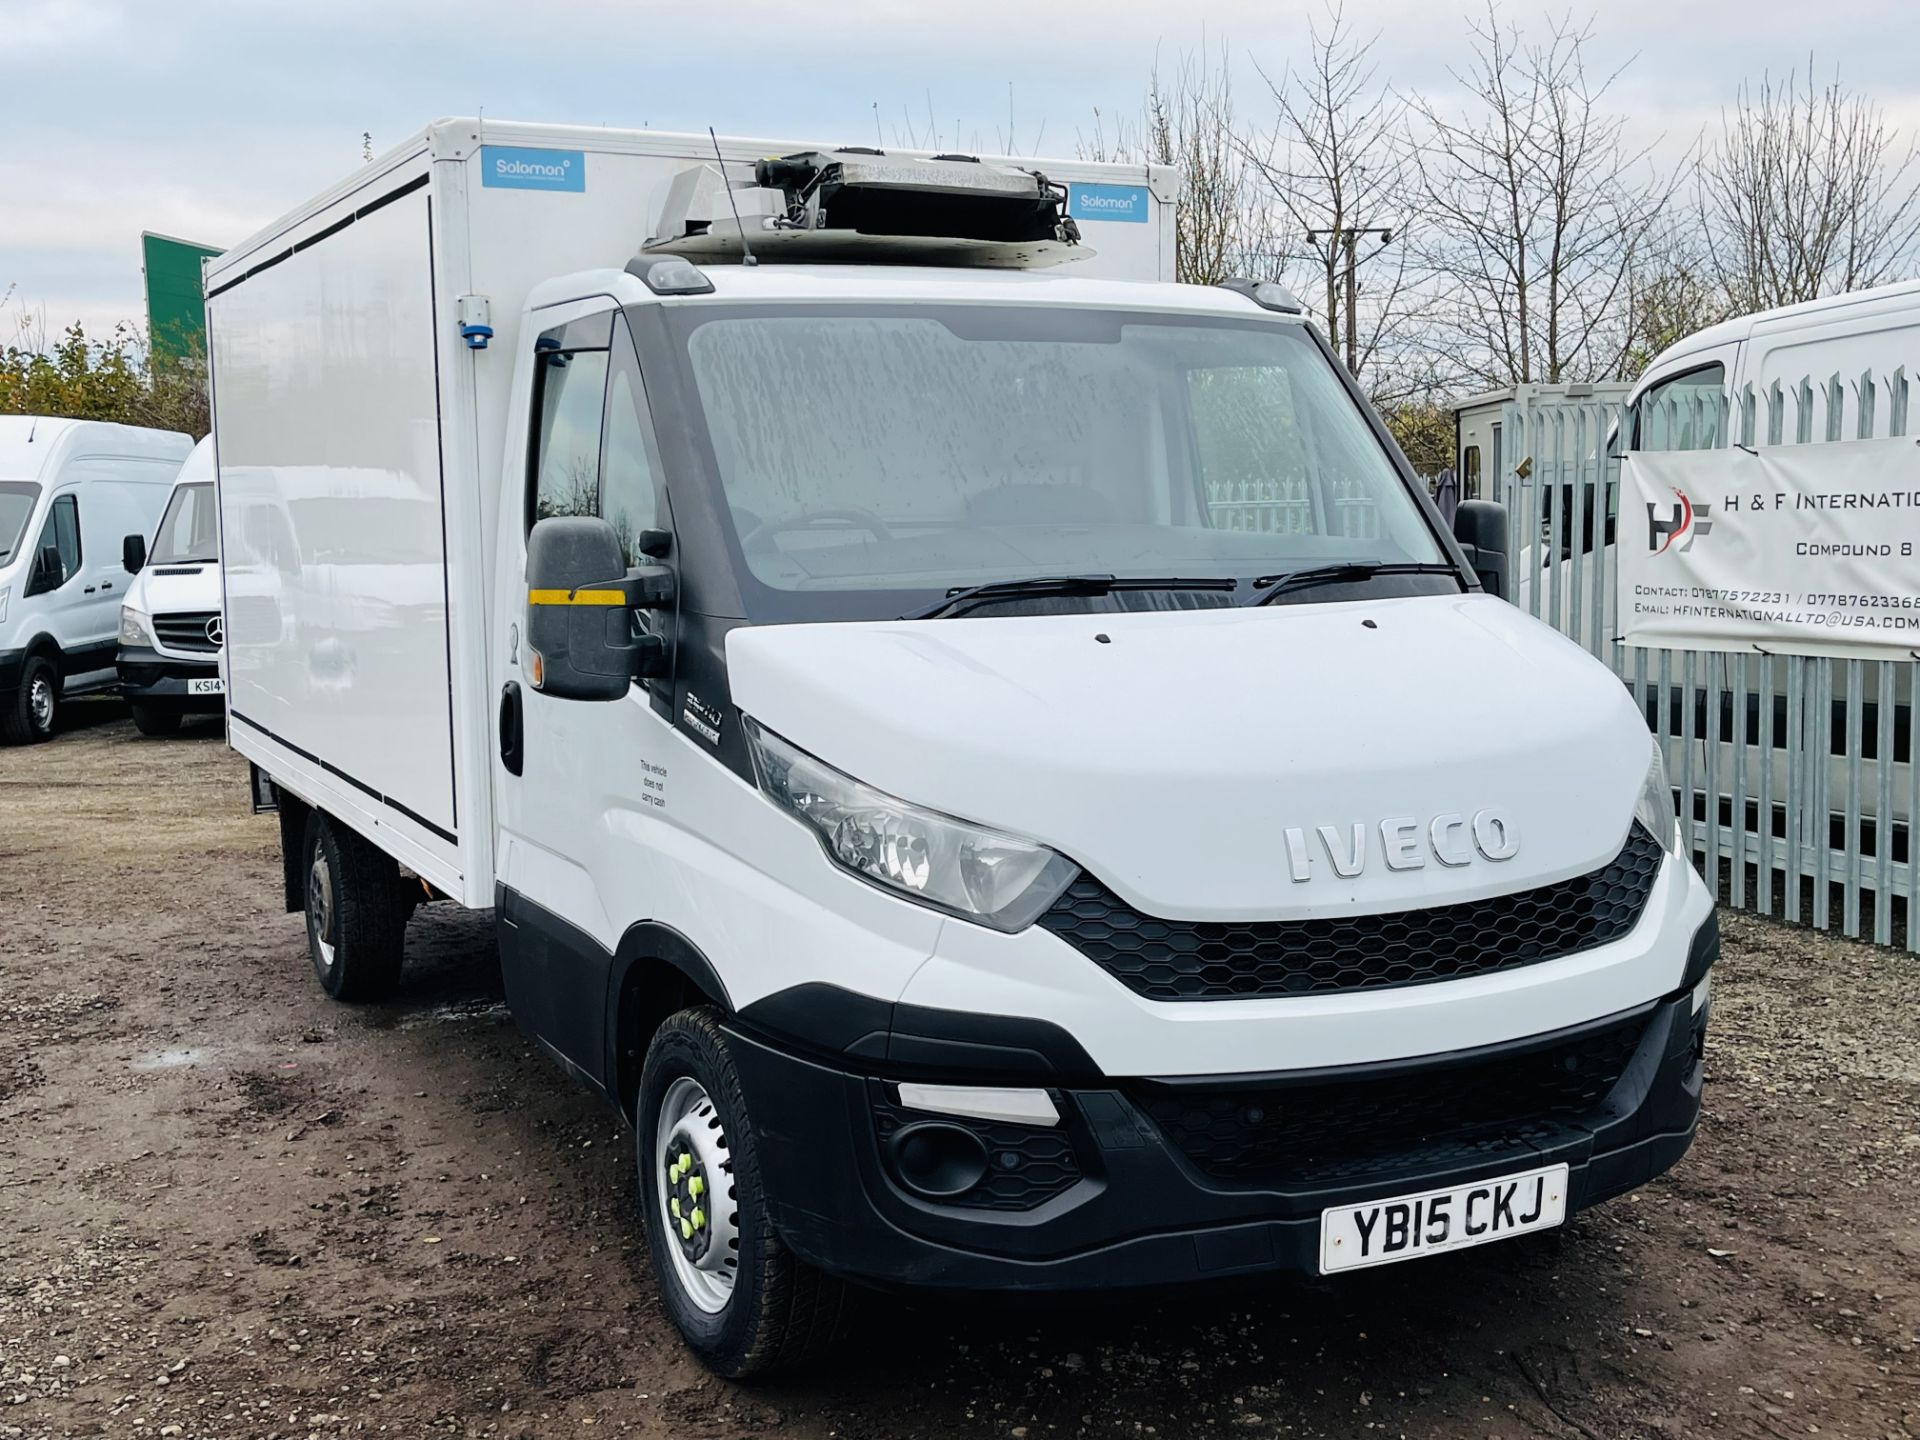 ** ON SALE ** Iveco Daily 35S11 L2 2.3 HPI **Automatic** 105 Bhp 2015 '15 Reg' GAH Fridge - - Image 2 of 23